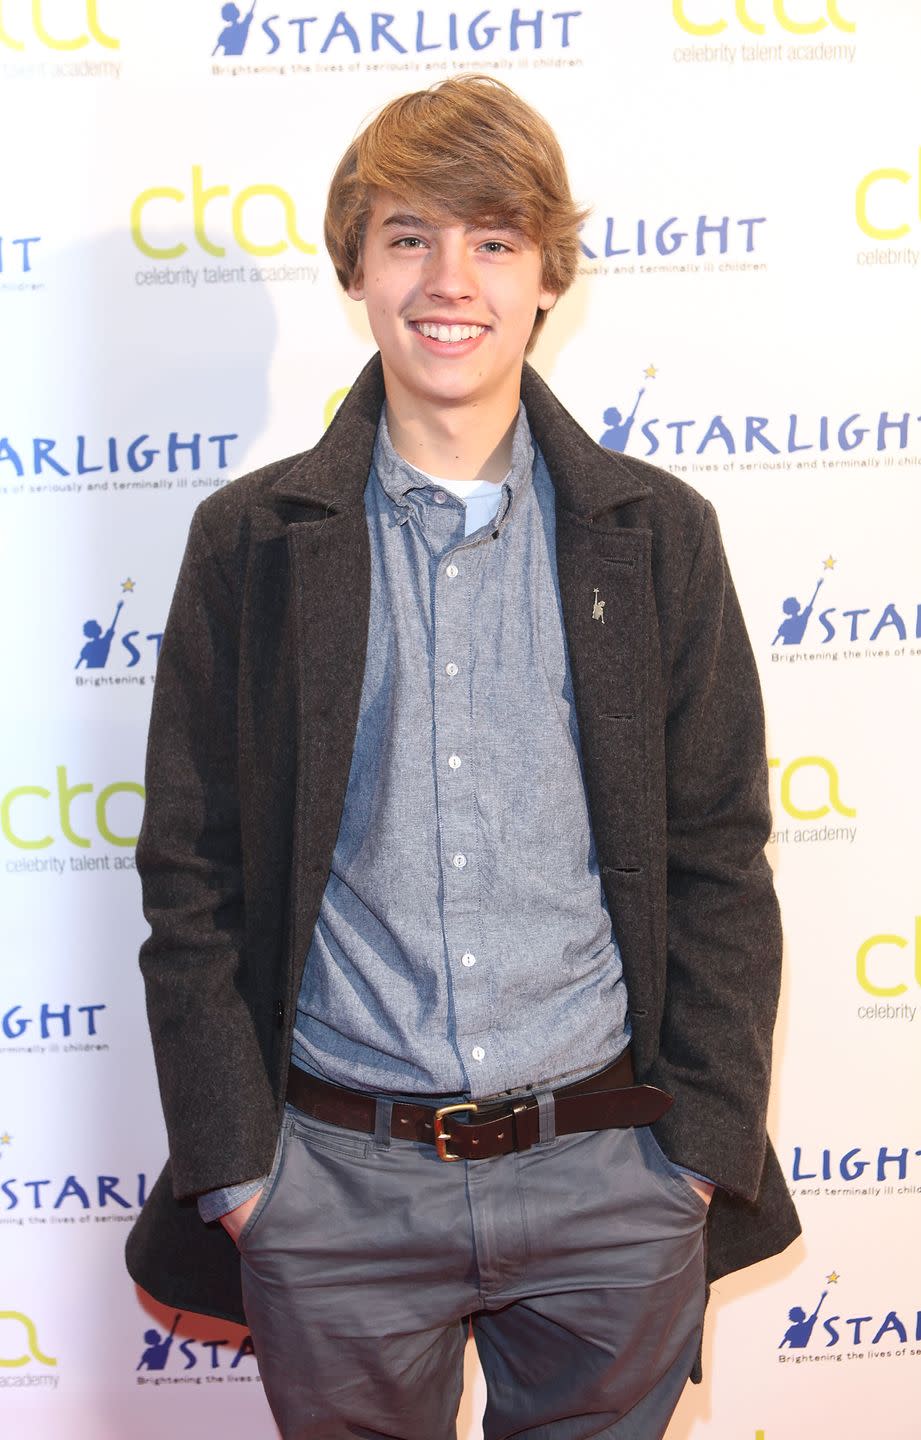 <p>Cole Sprouse (and his twin, Dylan) has been known for his blonde hair since he was a child actor. After growing up as a Disney star, Sprouse took some time off from acting, but still kept his blonde hair.</p>